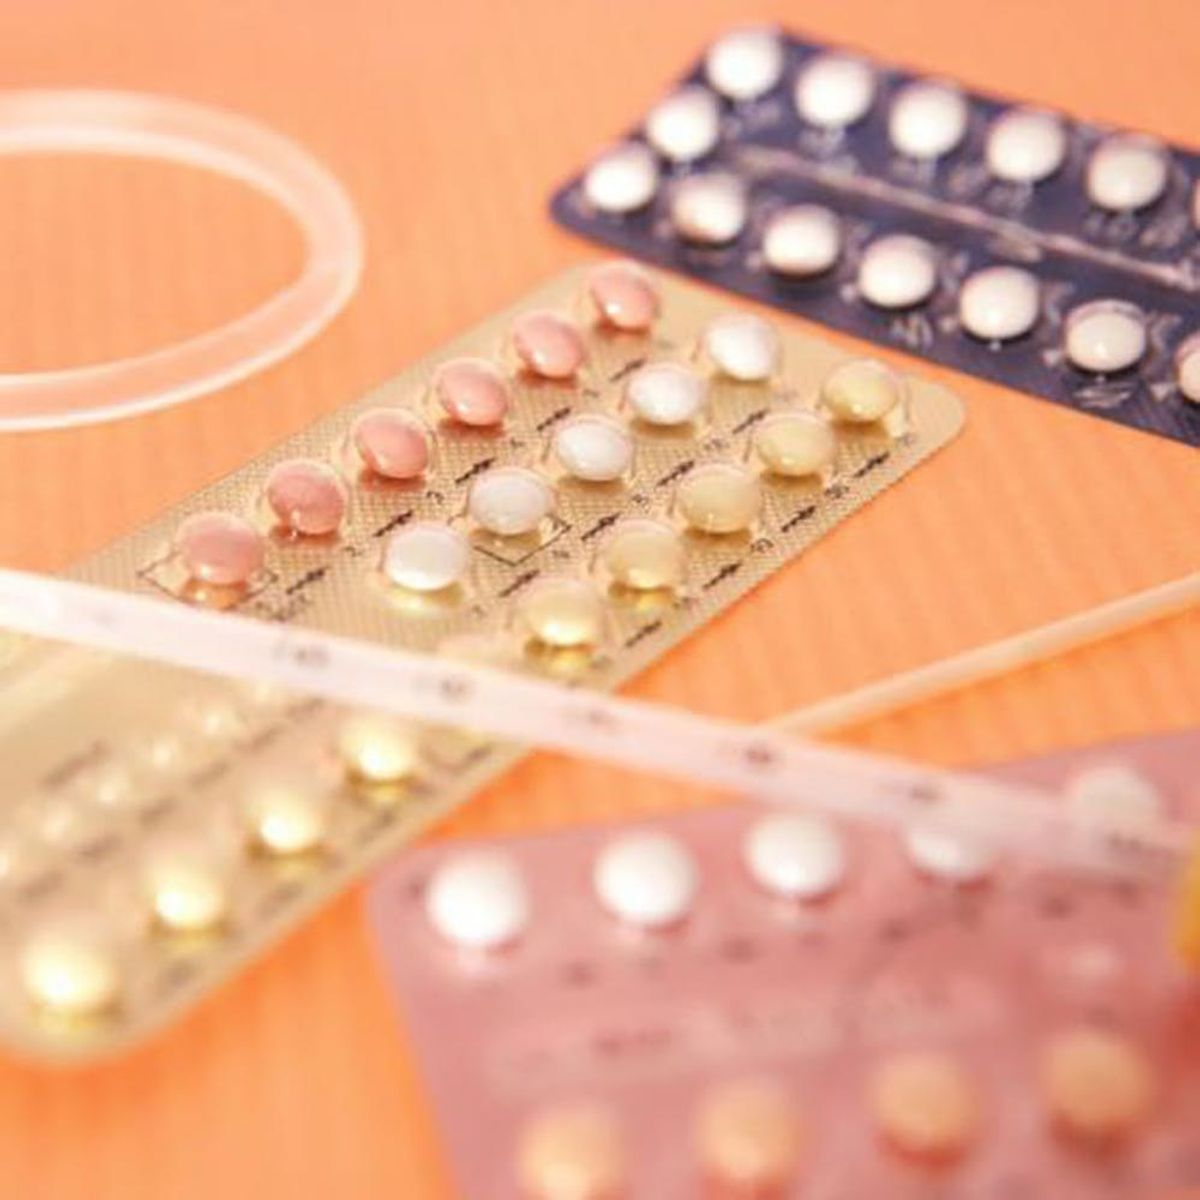 This Senate Vote Threatens Millions of Women’s Birth Control Access and More